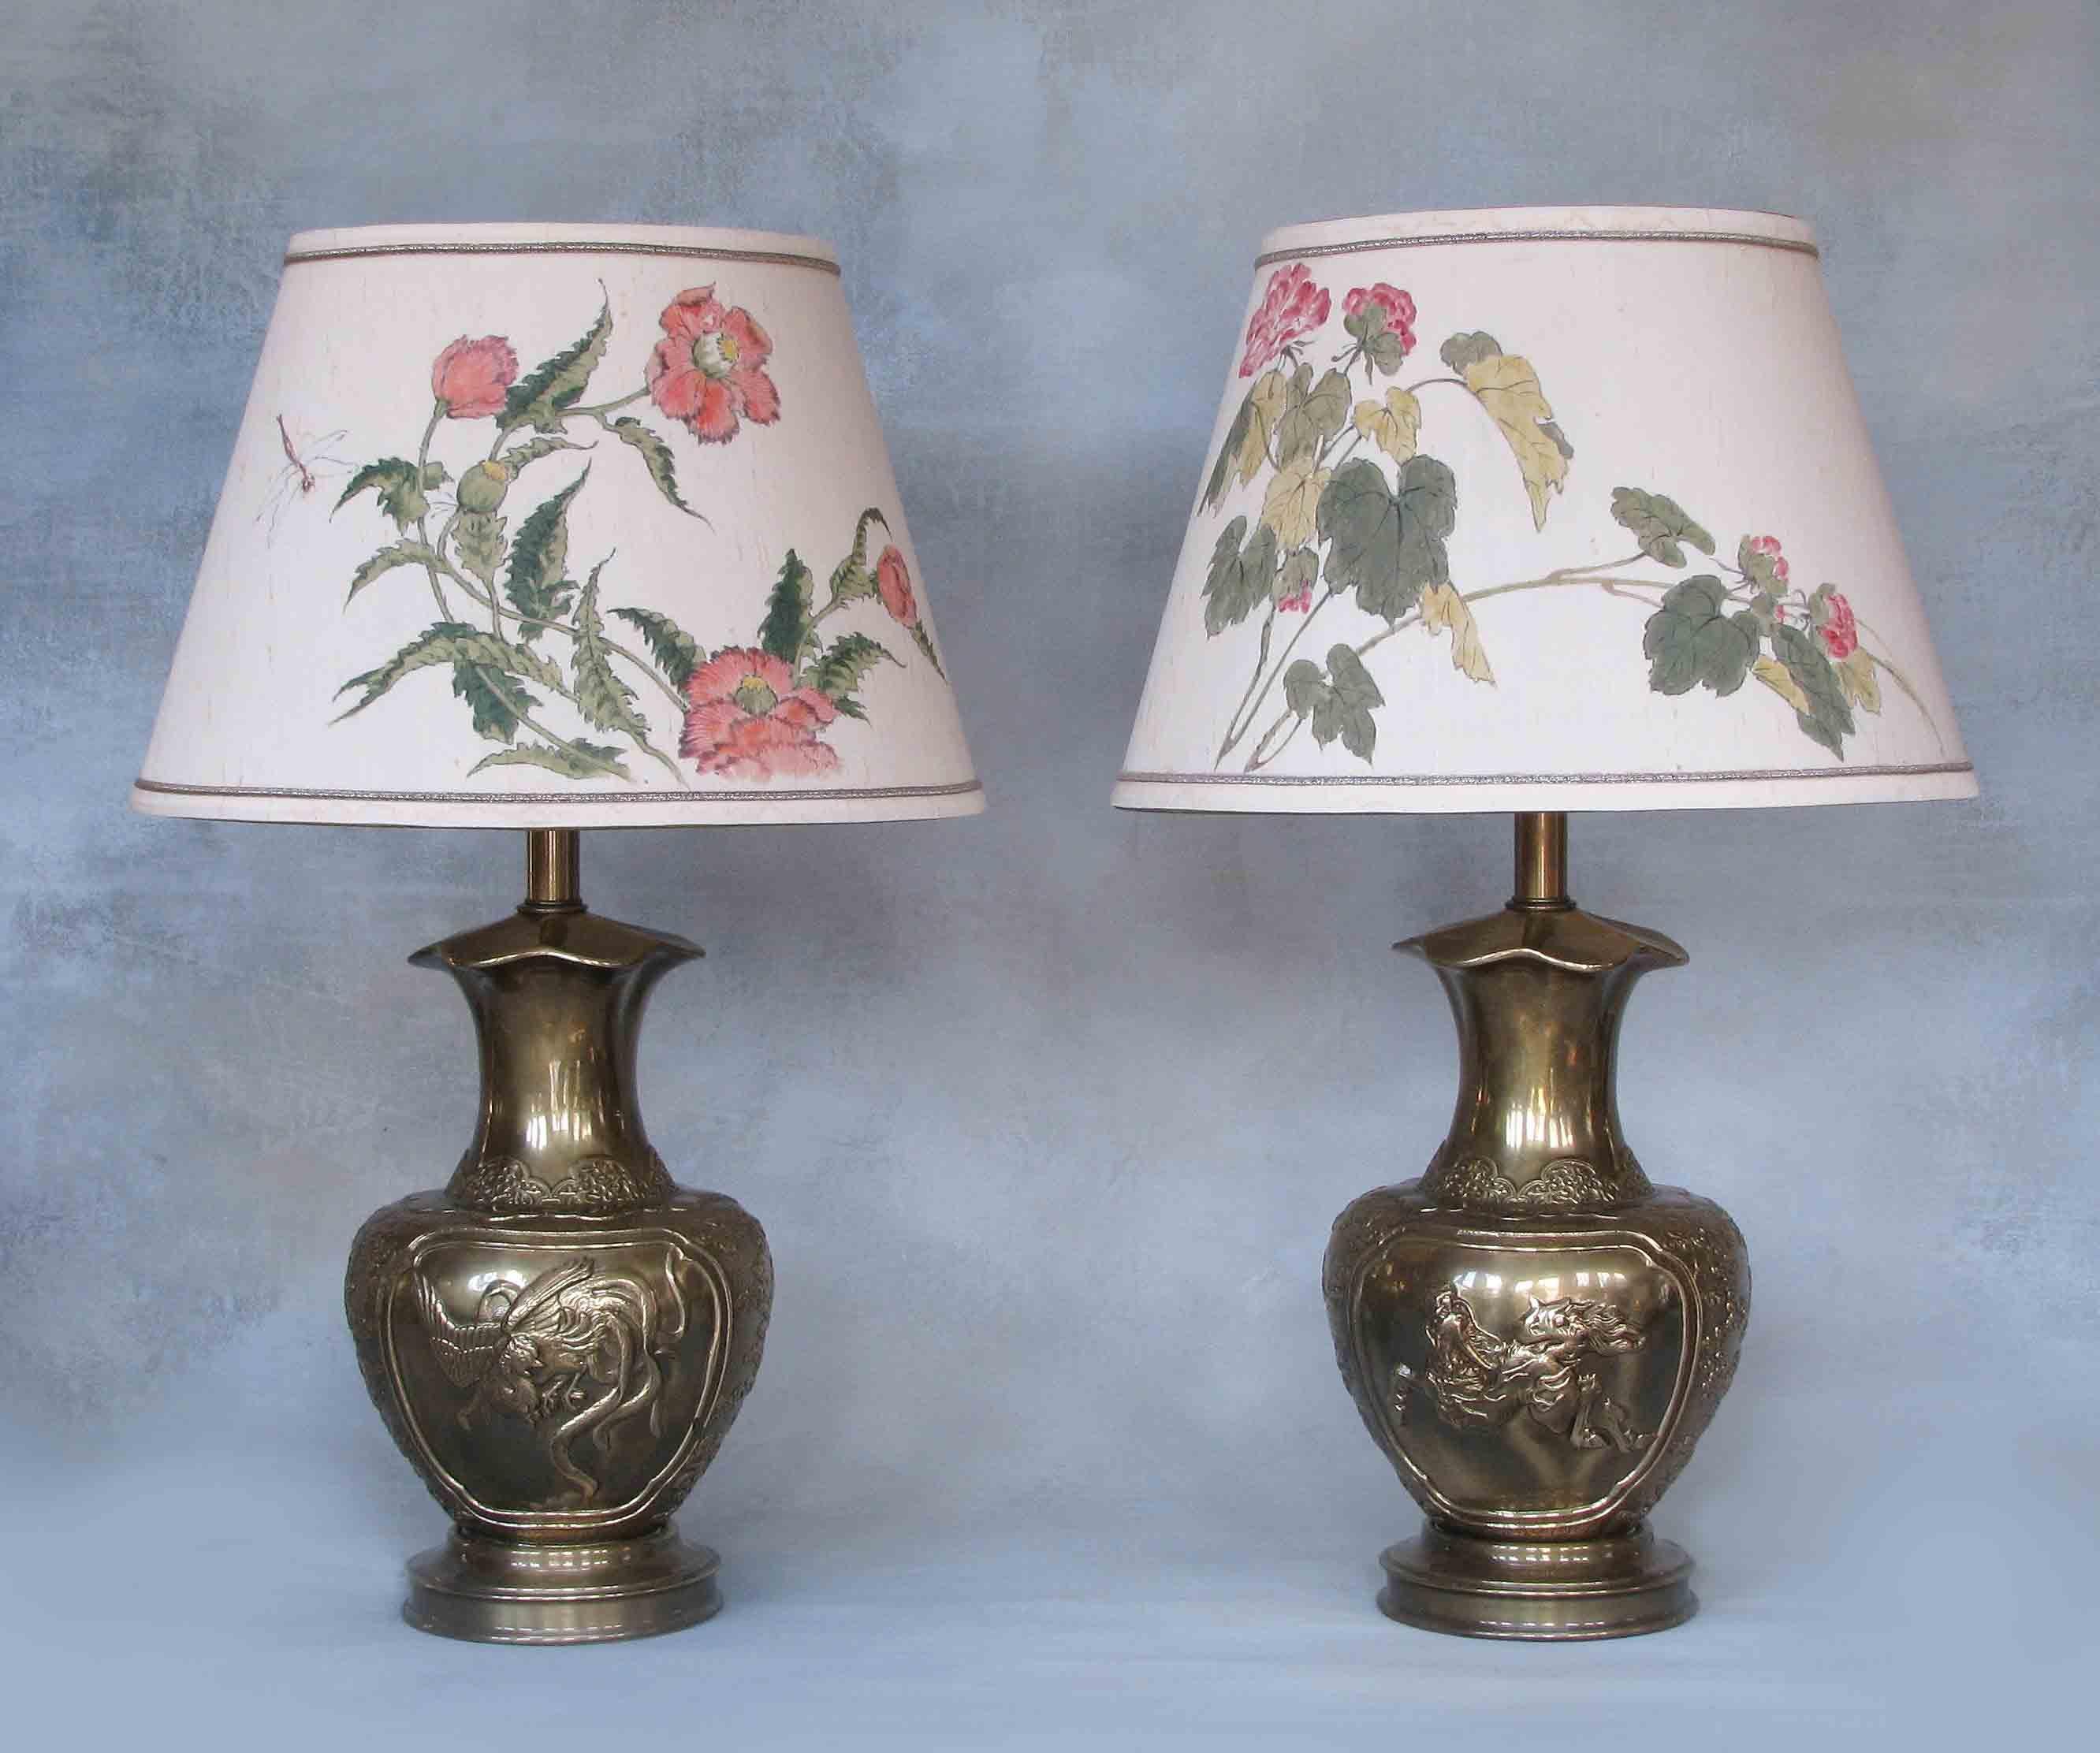 Very Decorative Table Lamps, Japanese Style by Tyndale for Frederick Cooper Co. For Sale 2